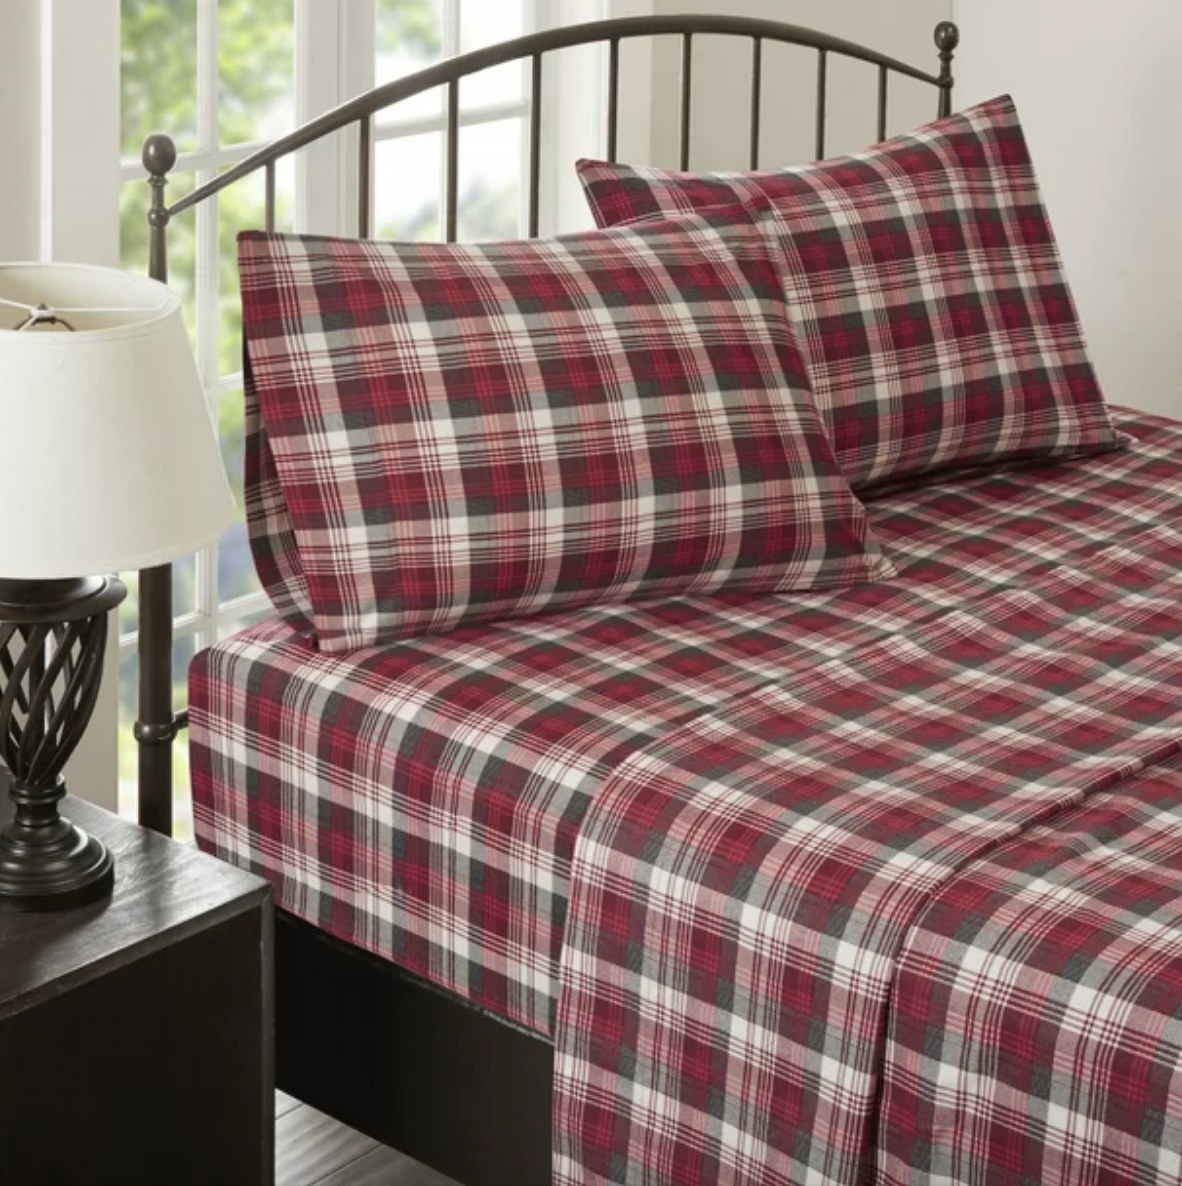 Red plaid sheets and pillow case on bed